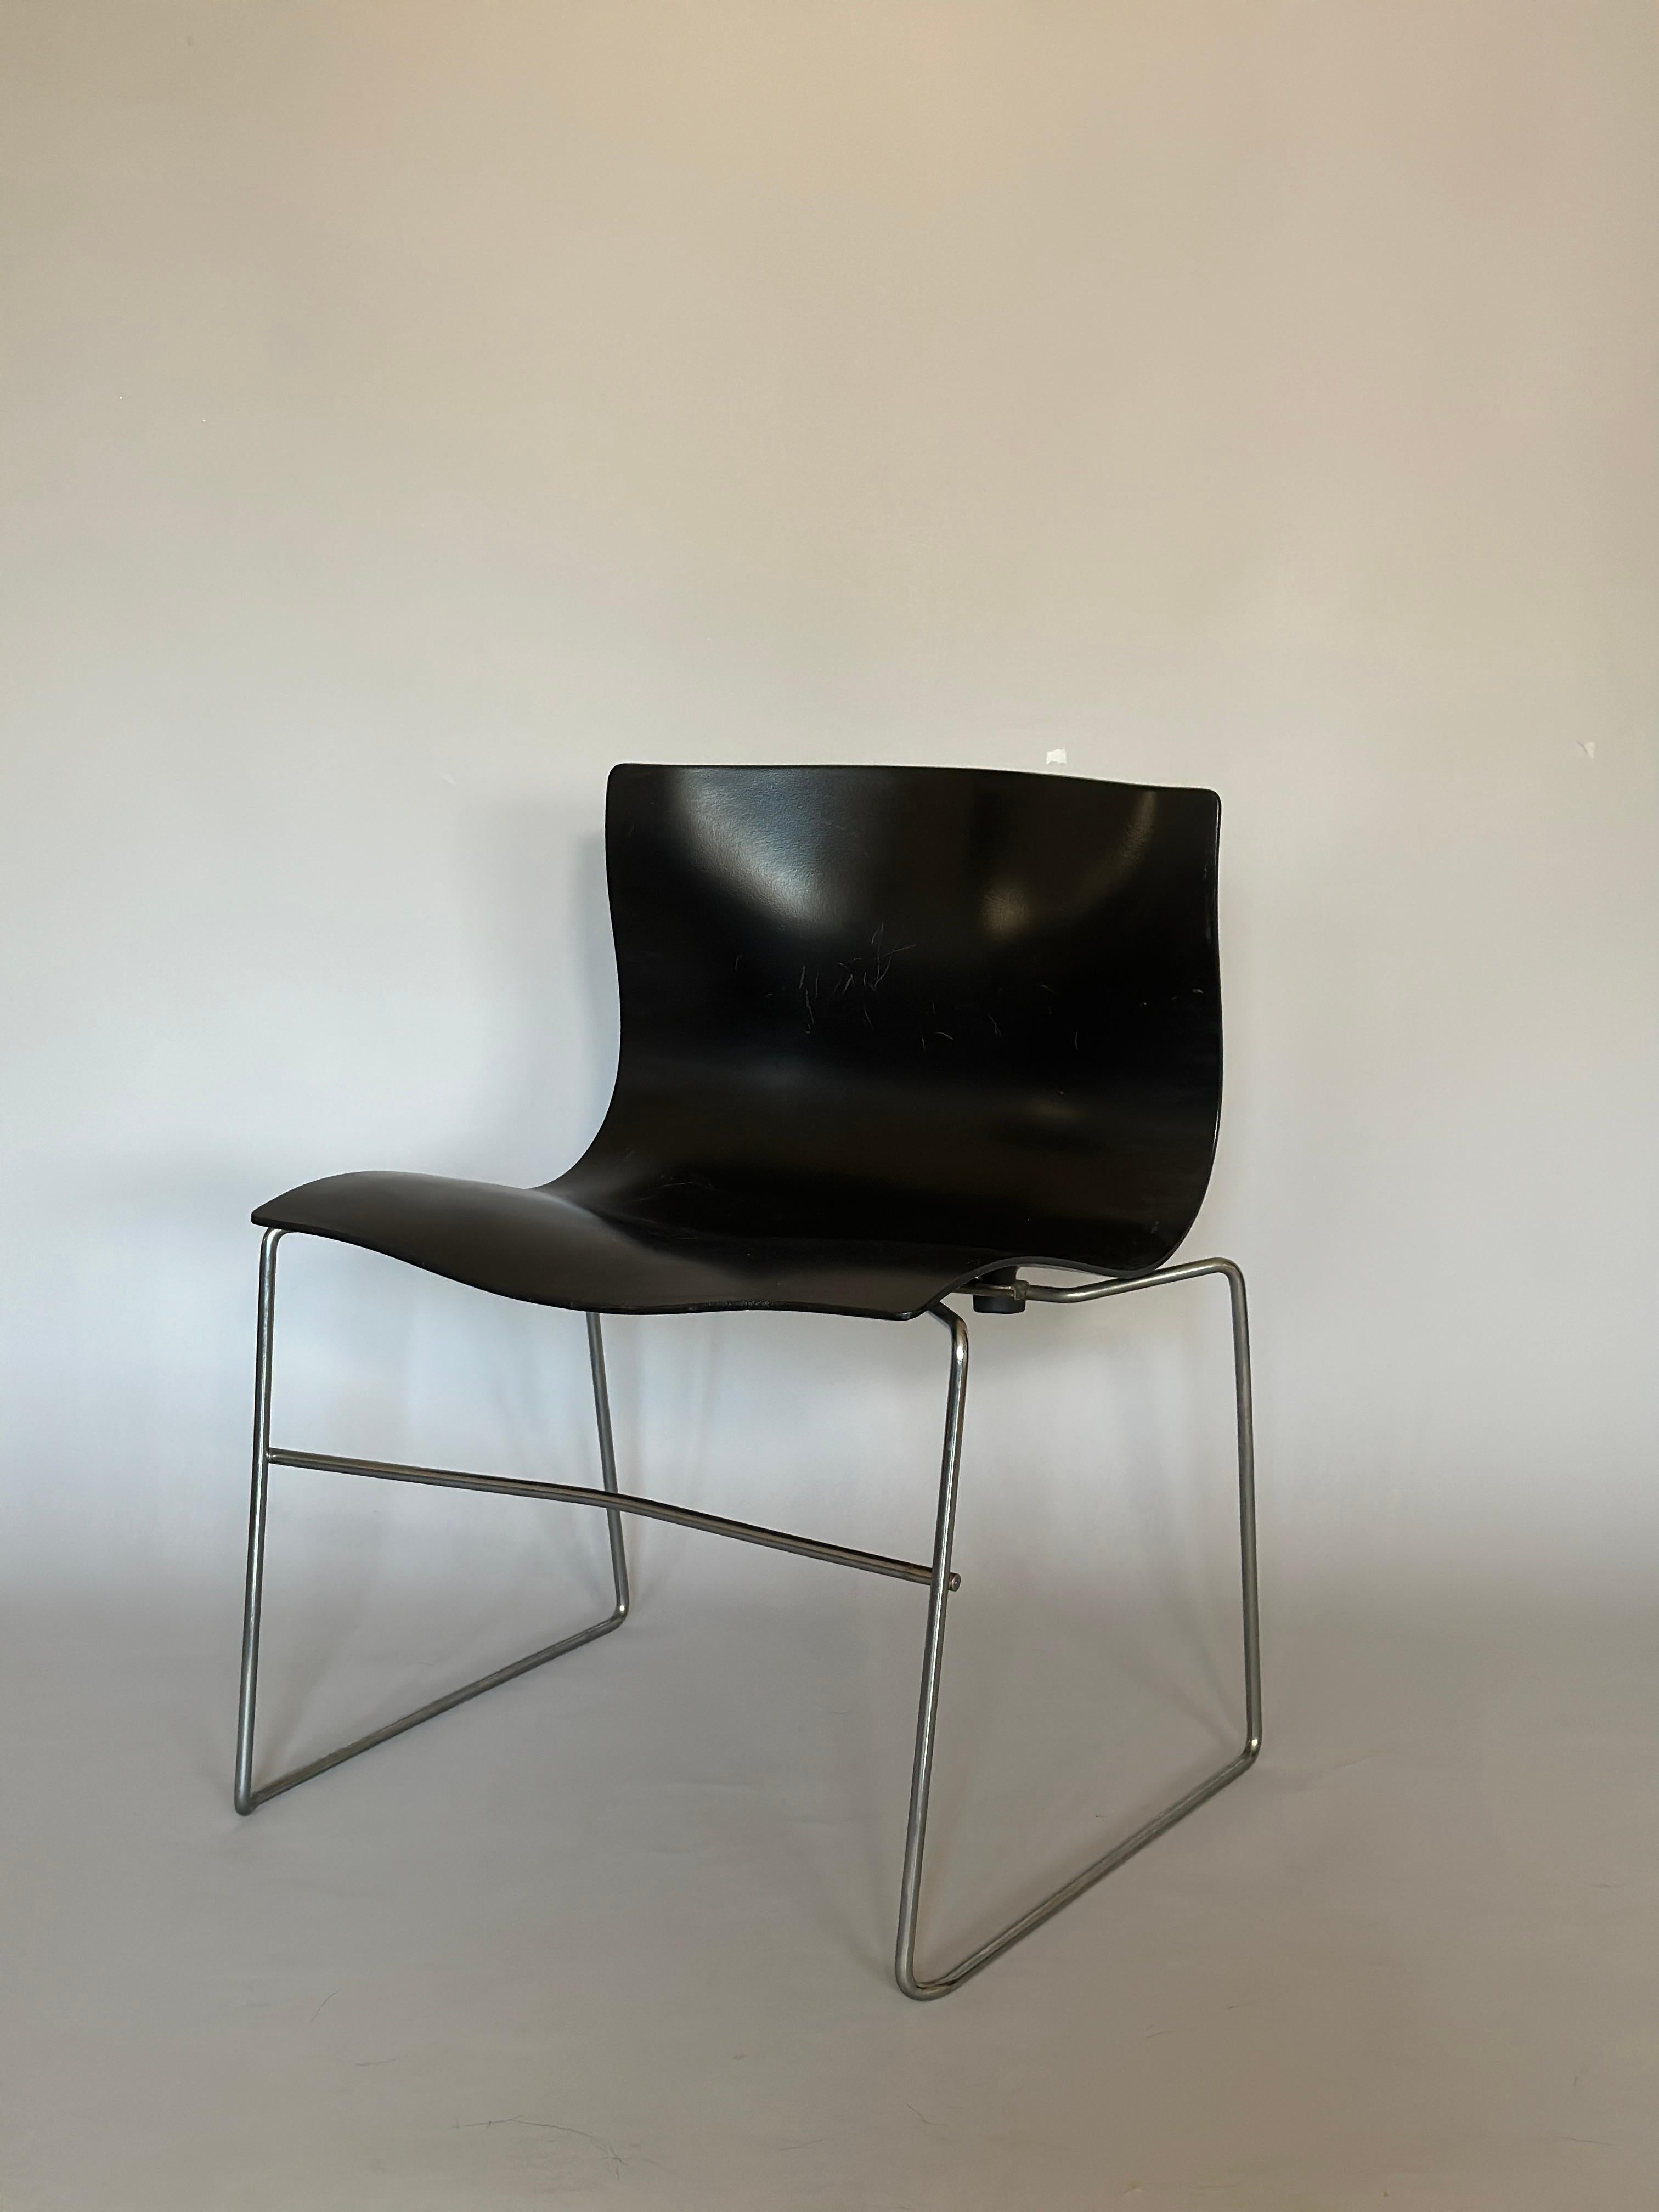 Knoll chairs by Massimo Vagnelli 1985 In Good Condition For Sale In Čelinac, BA